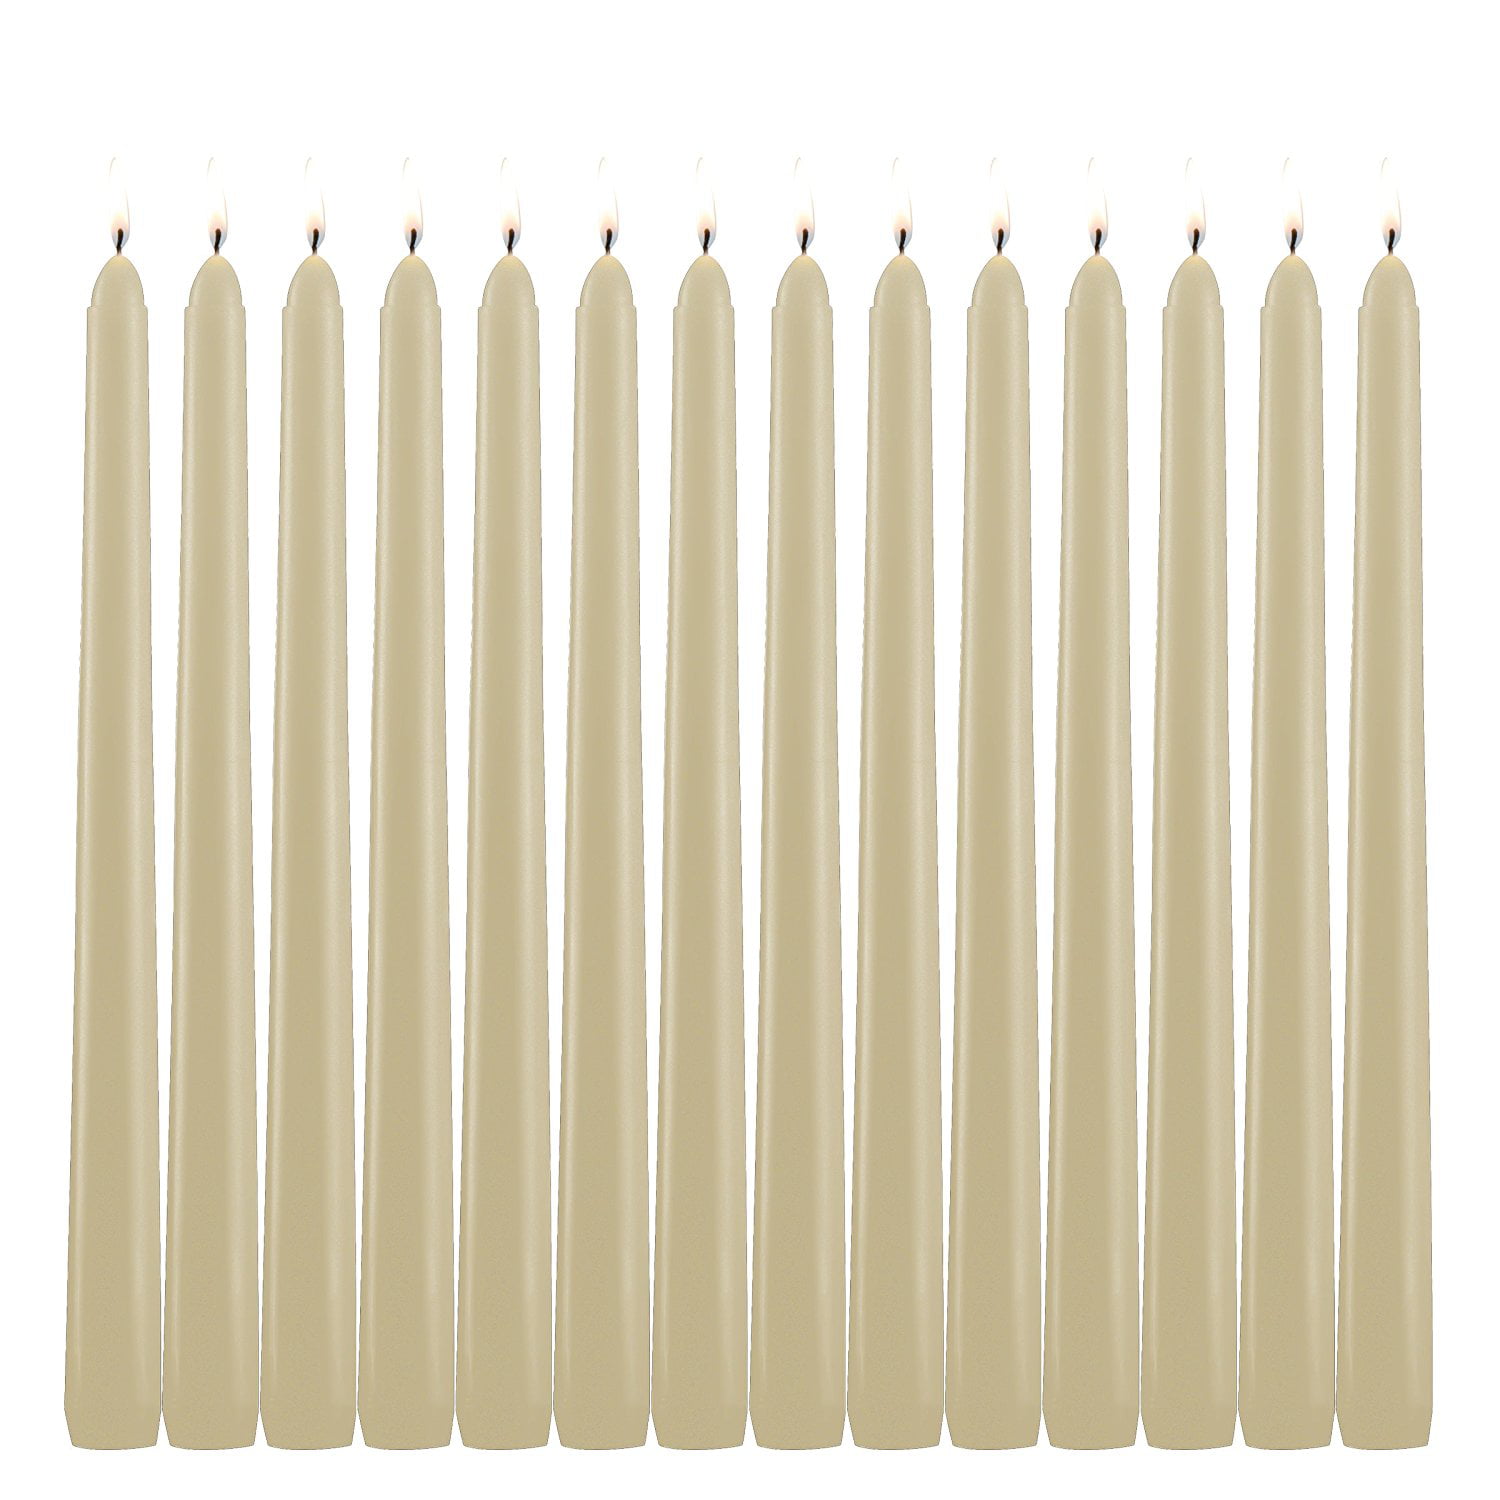 3/4 inch 10 inch Tall Set of 14 Dripless Candles Ivory Taper Candles 